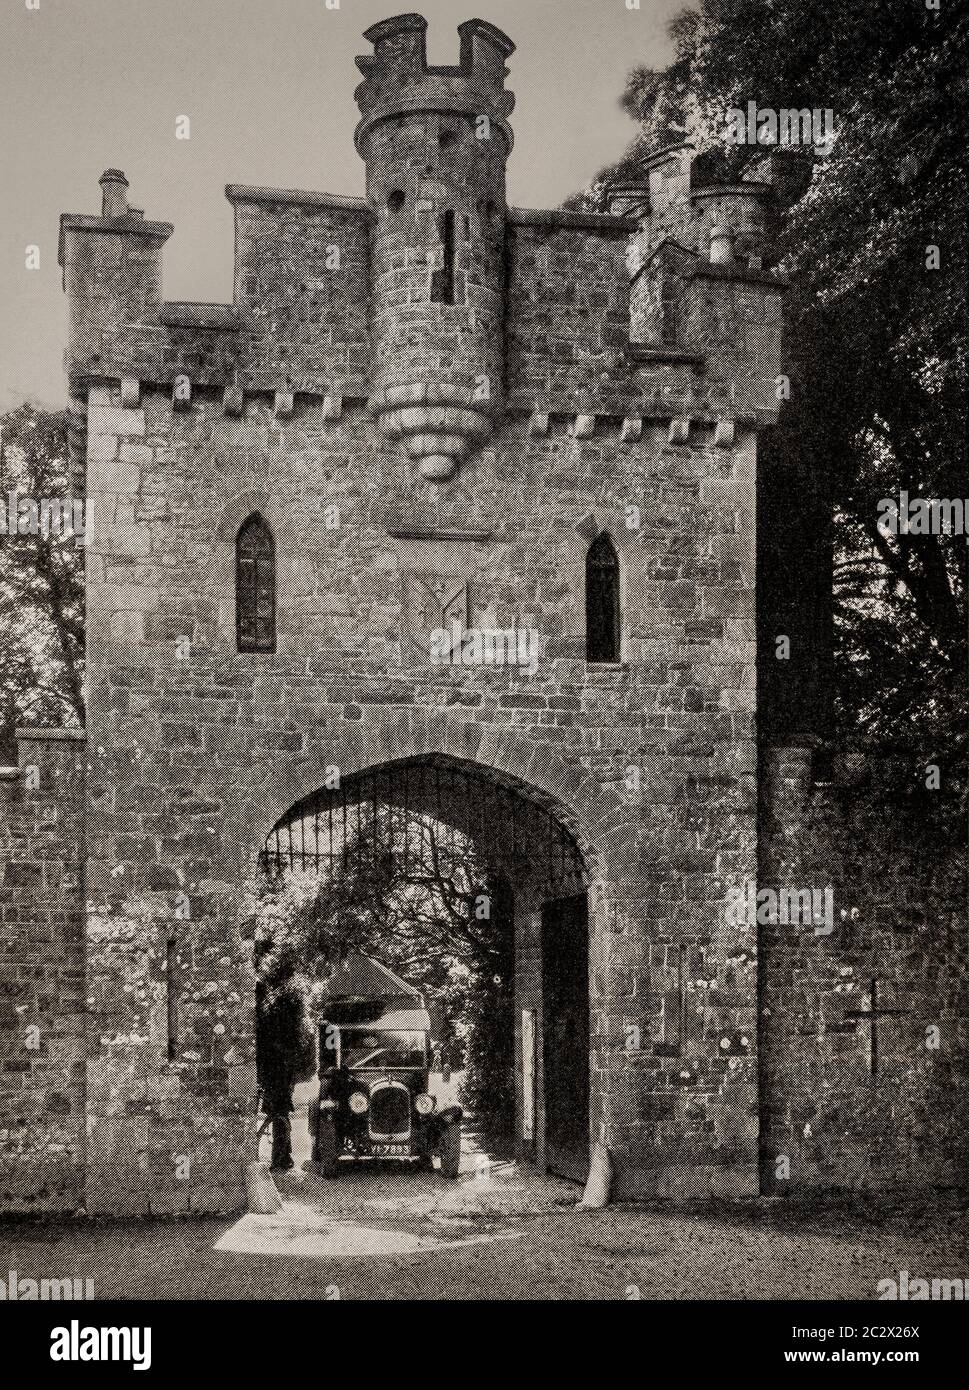 An early 1920's view of classic car leaving the 18th century Mock Tudor Gateway to Slane Castle, in County Meath, Ireland. Originally photographed by Clifton Adams (1890-1934) for 'Ireland: The Rock Whence I Was Hewn', a National Geographic Magazine feature from March 1927. Stock Photo